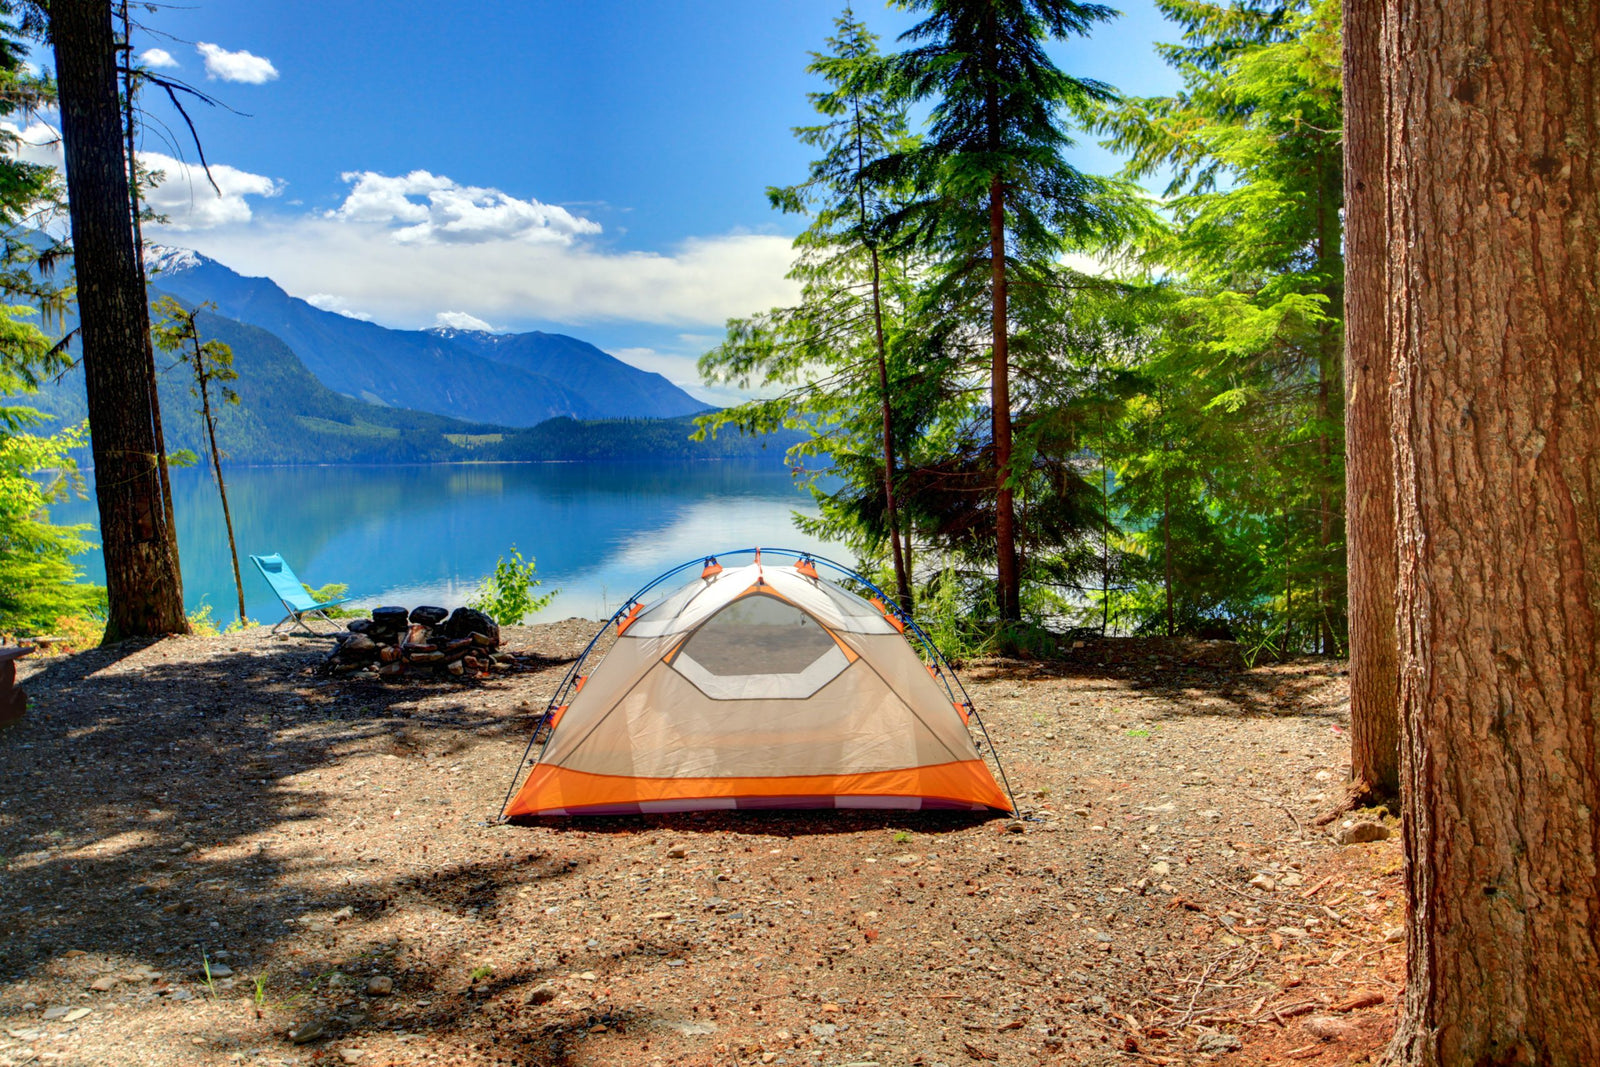 Camping tent located beside a lake and forest with campers using biodegradable soap and shampoo